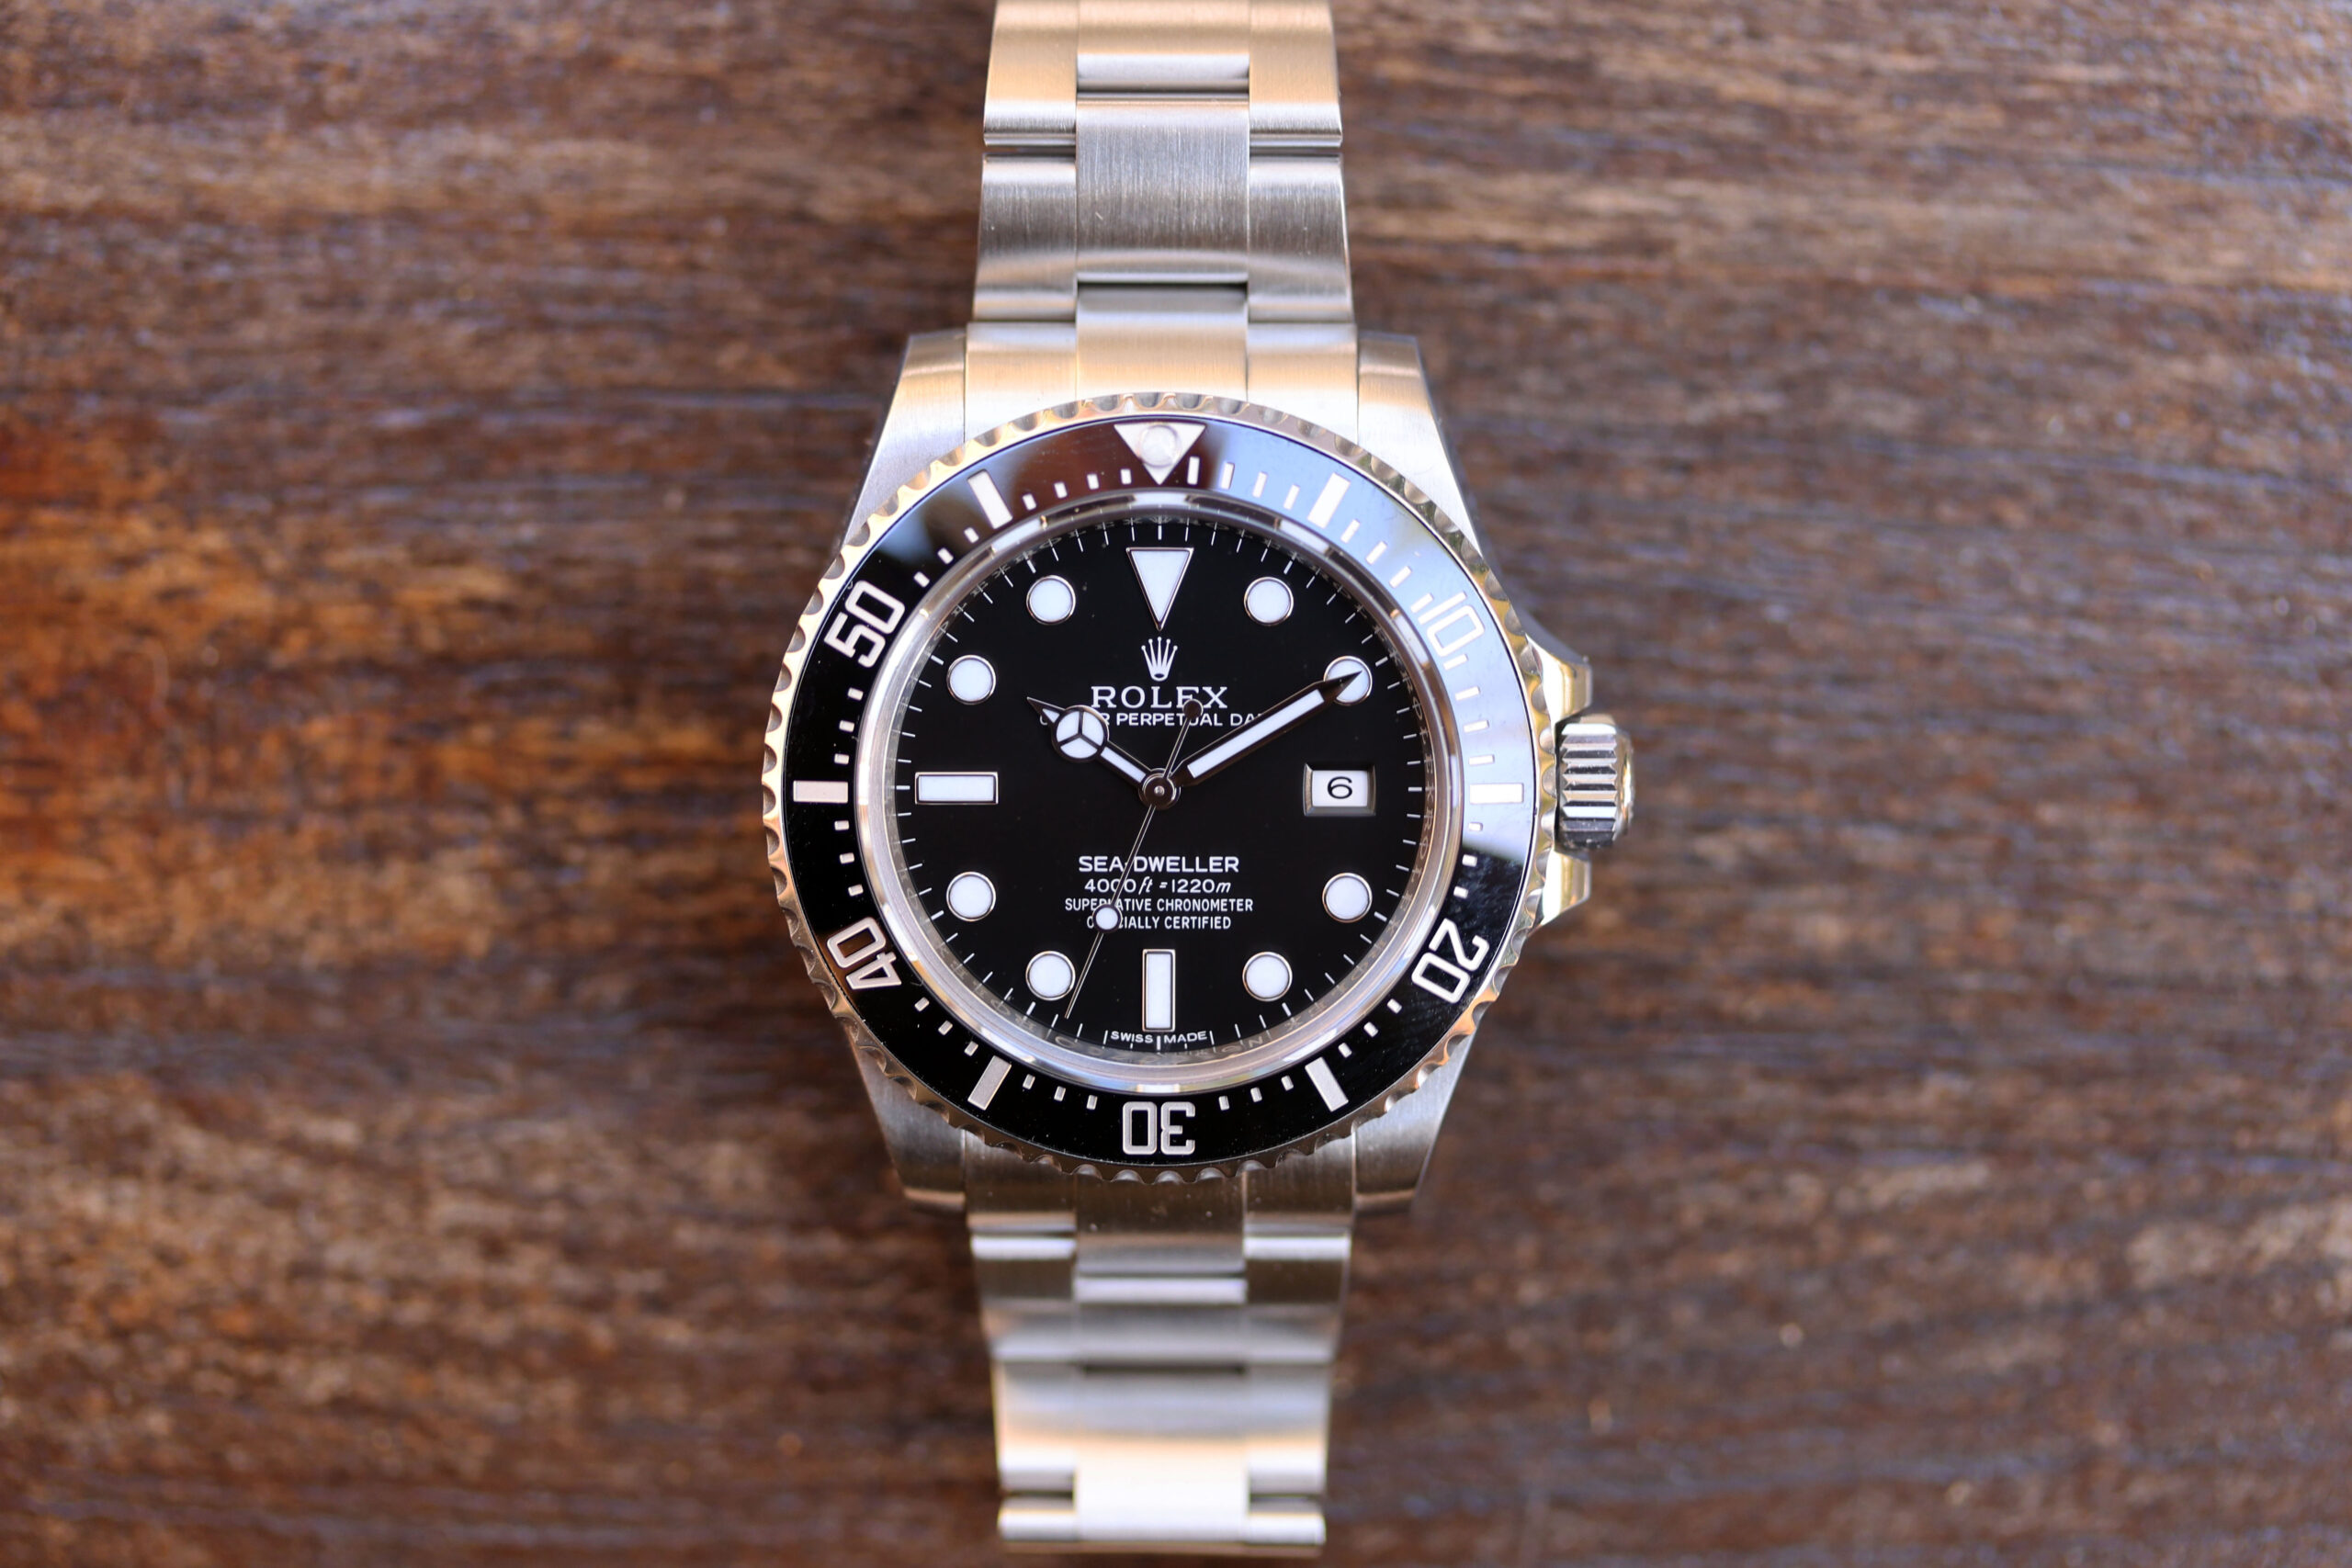 ceja popurrí Personas mayores 2016 Rolex Sea-Dweller SD4K ref. 116600 "40mm, Discontinued, B&P" - Lunar  Oyster - Buying and Selling